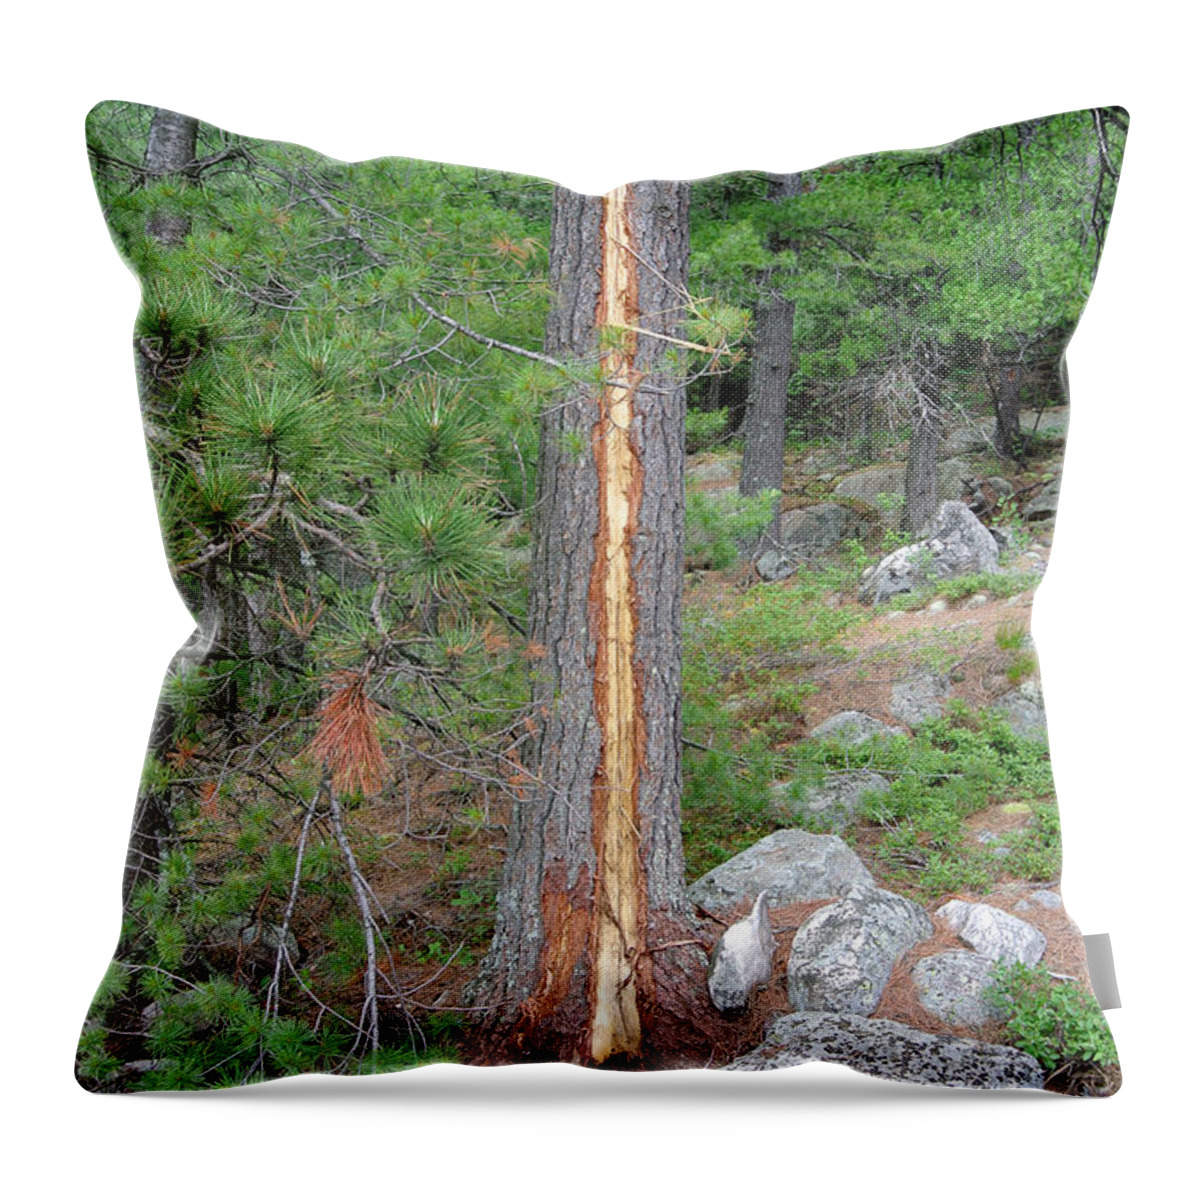 Tree Throw Pillow featuring the photograph Lightning Strike On Tree by Ted Kinsman